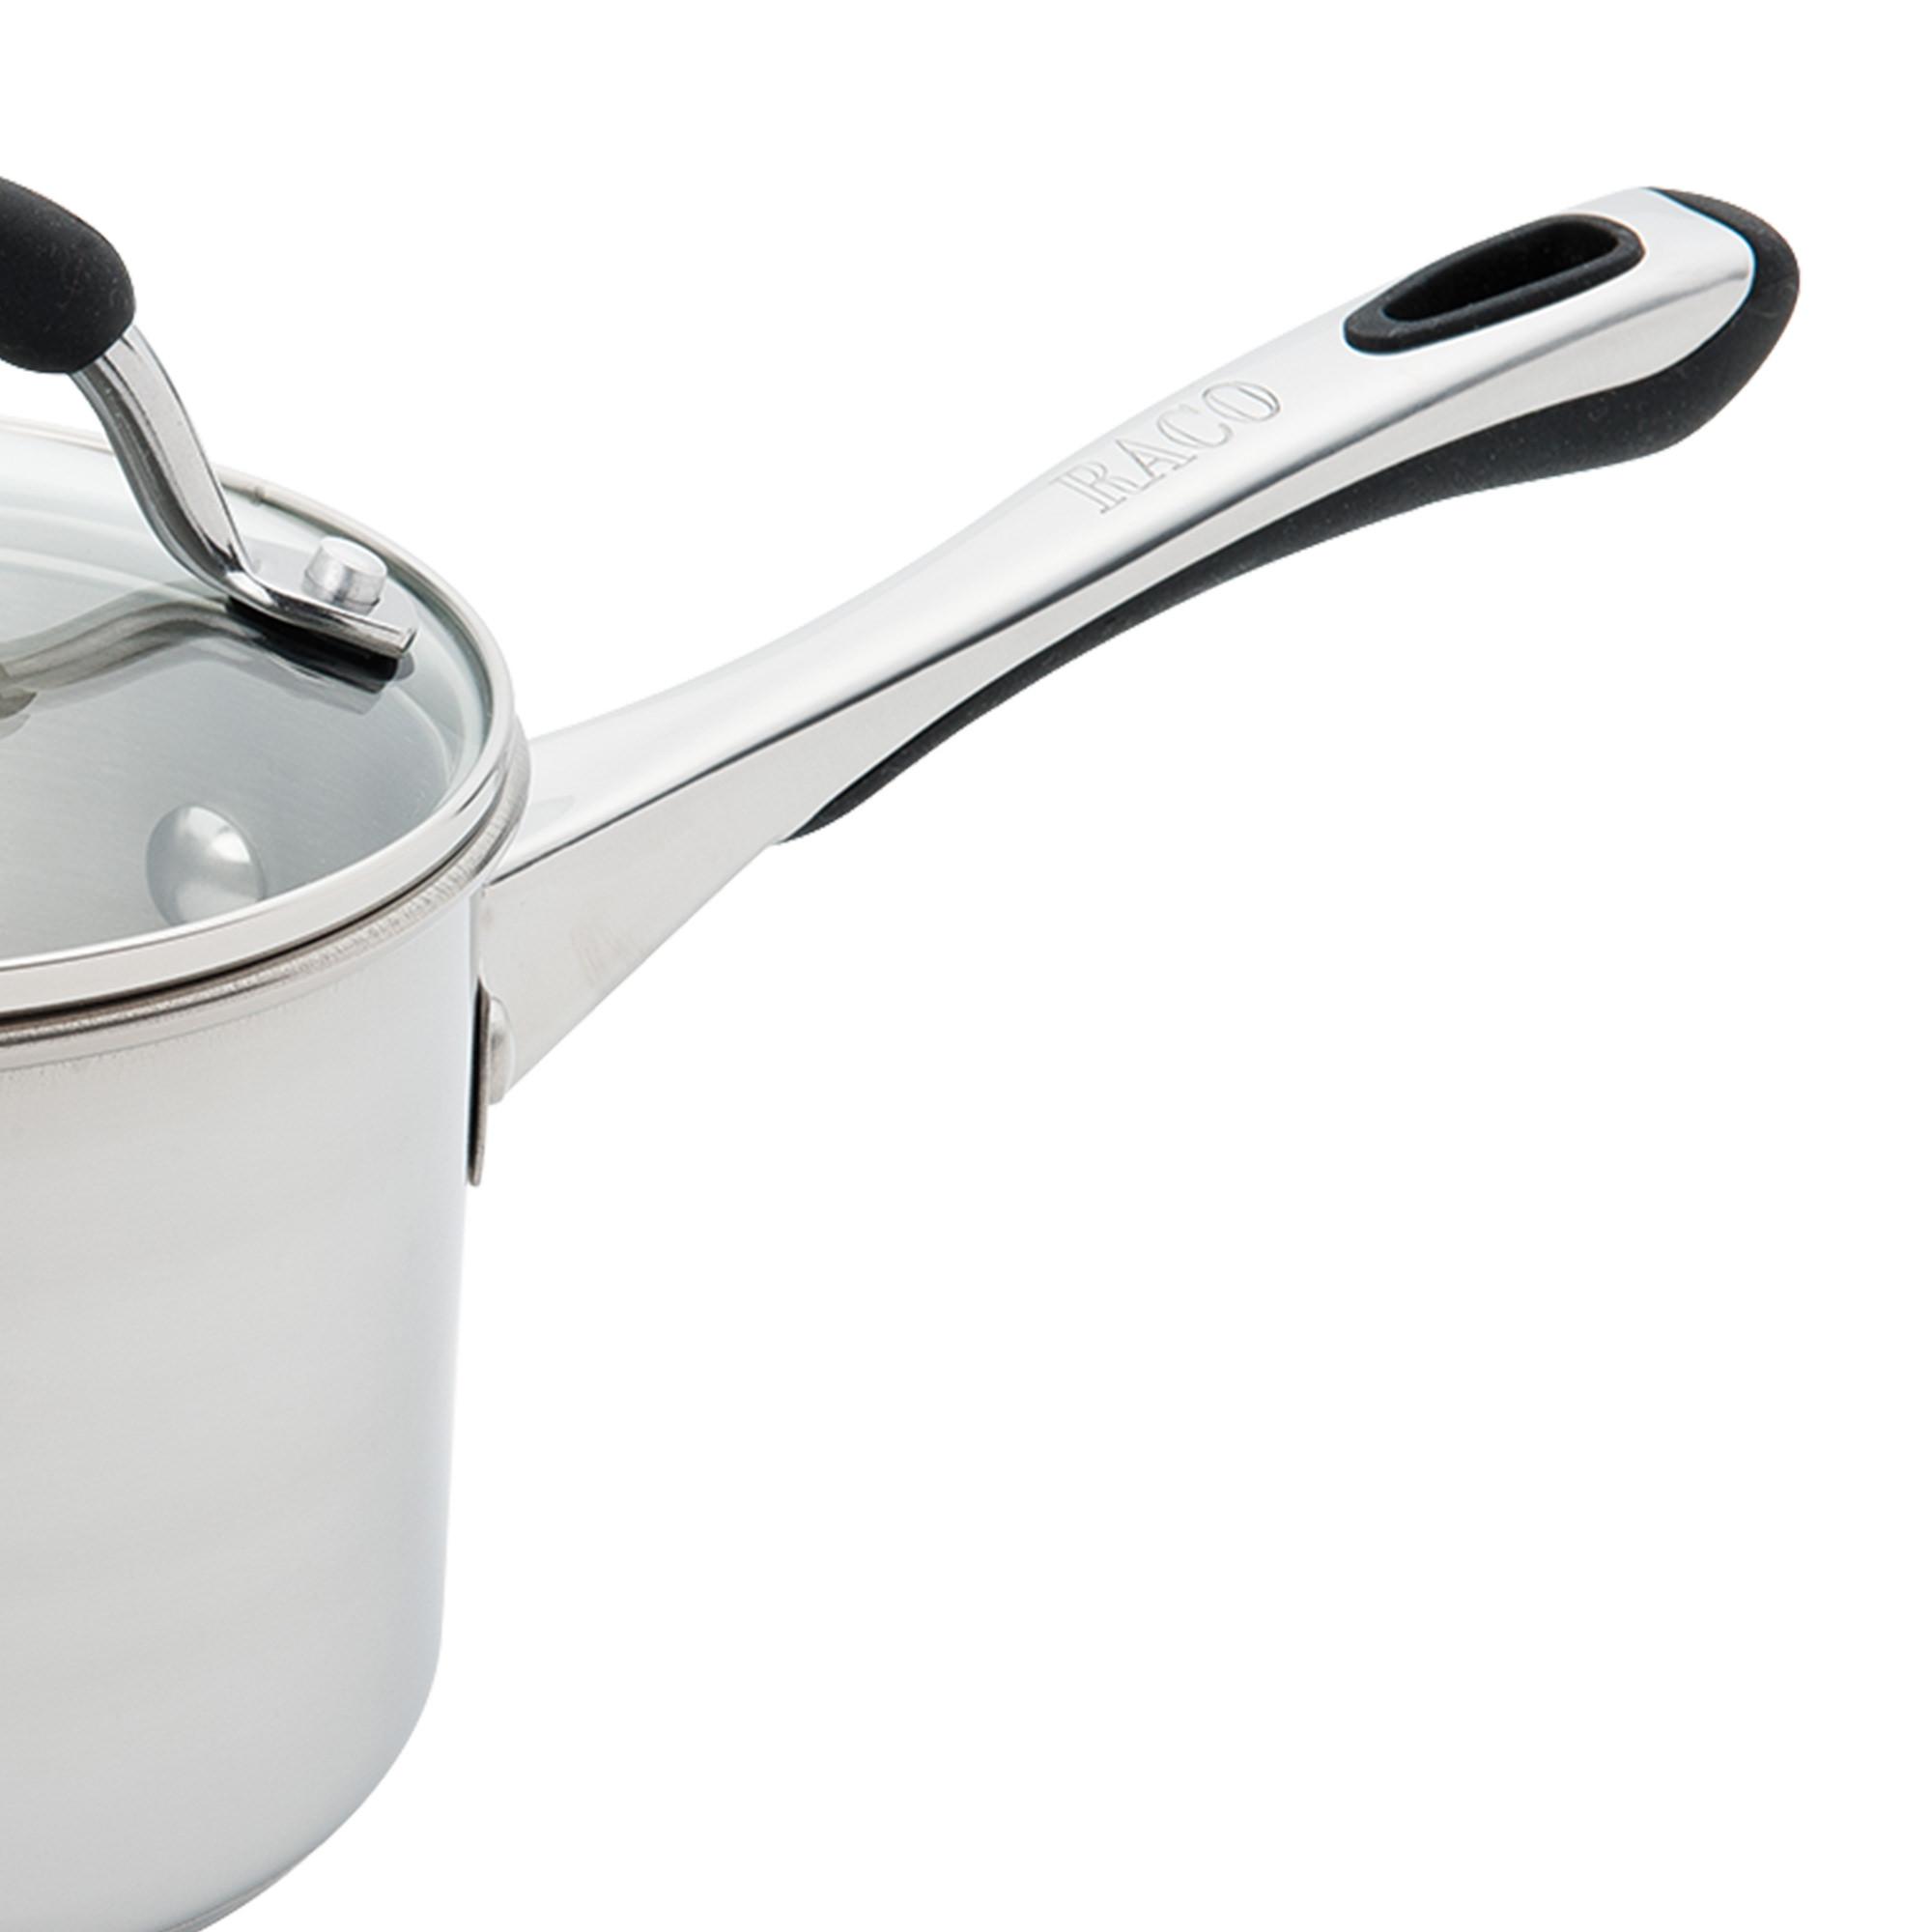 Raco Contemporary Stainless Steel Saucepan 18cm - 2.8L Image 5